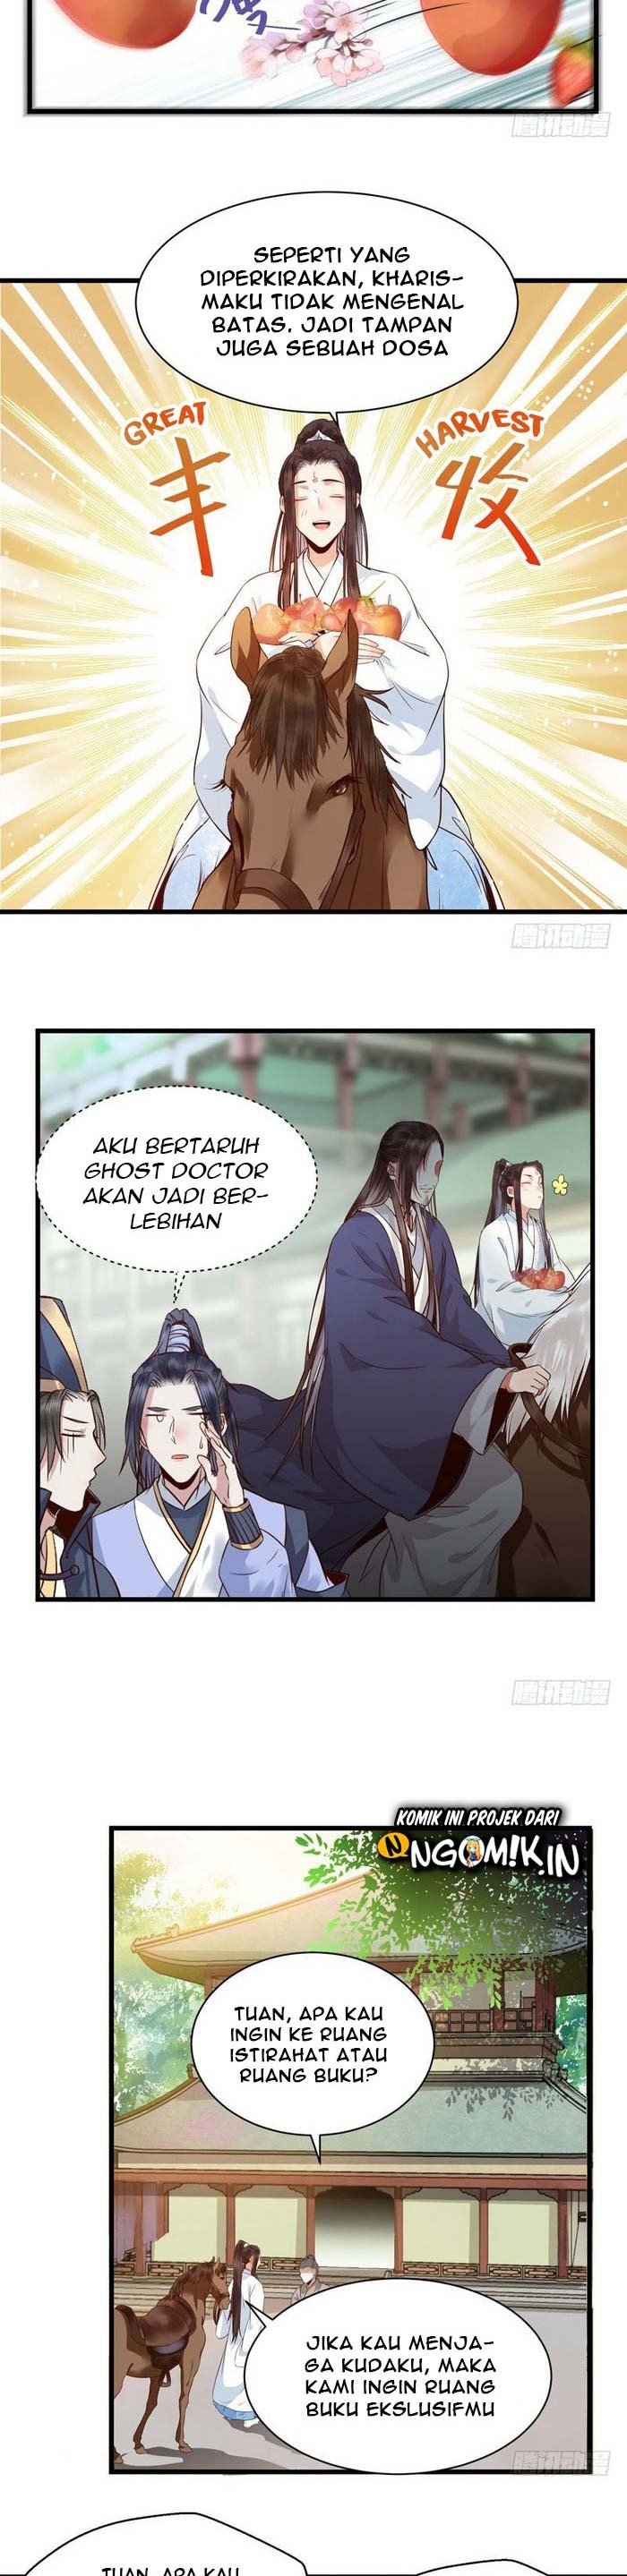 The Ghostly Doctor Chapter 185